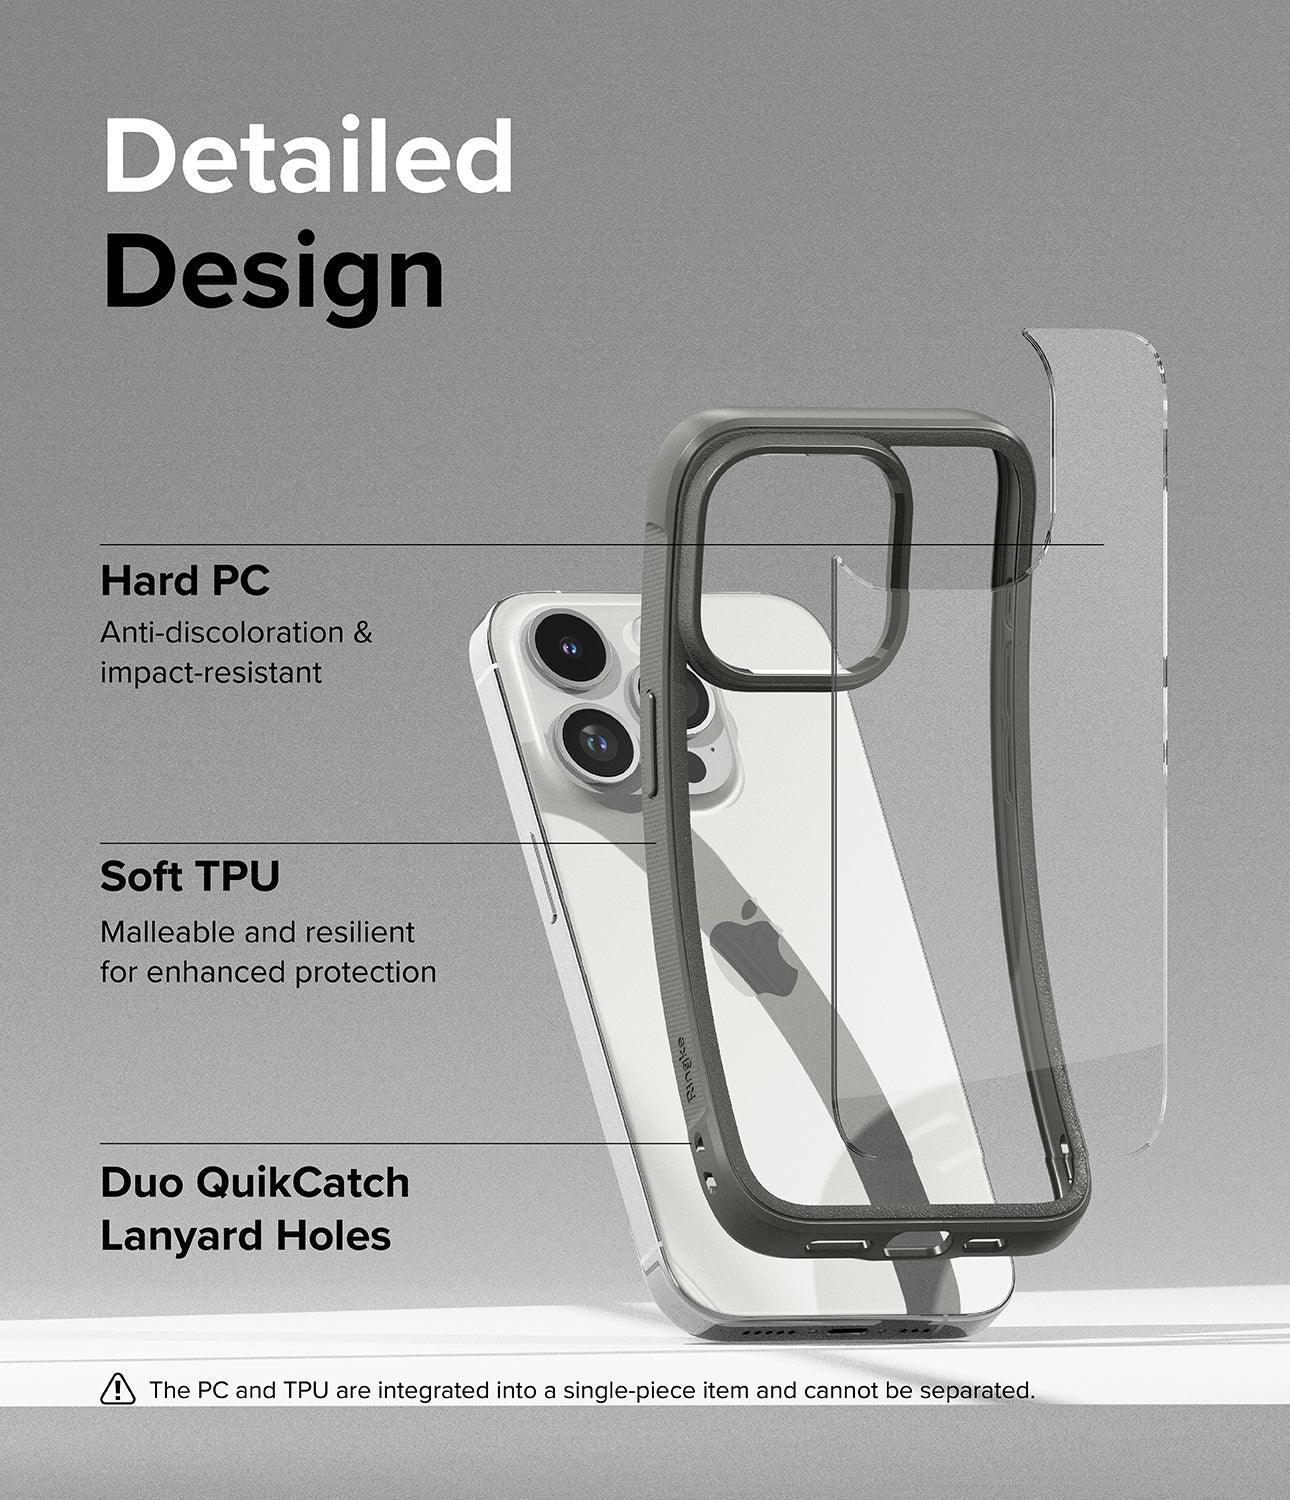 iPhone 15 Pro Case | Fusion Bold - Clear/Gray - Detailed Design. Anti-discoloration and impact-resistant with Hard PC. Malleable and resilient for enhanced protection with Soft TPU. Duo QuikCatch Lanyard Holes.